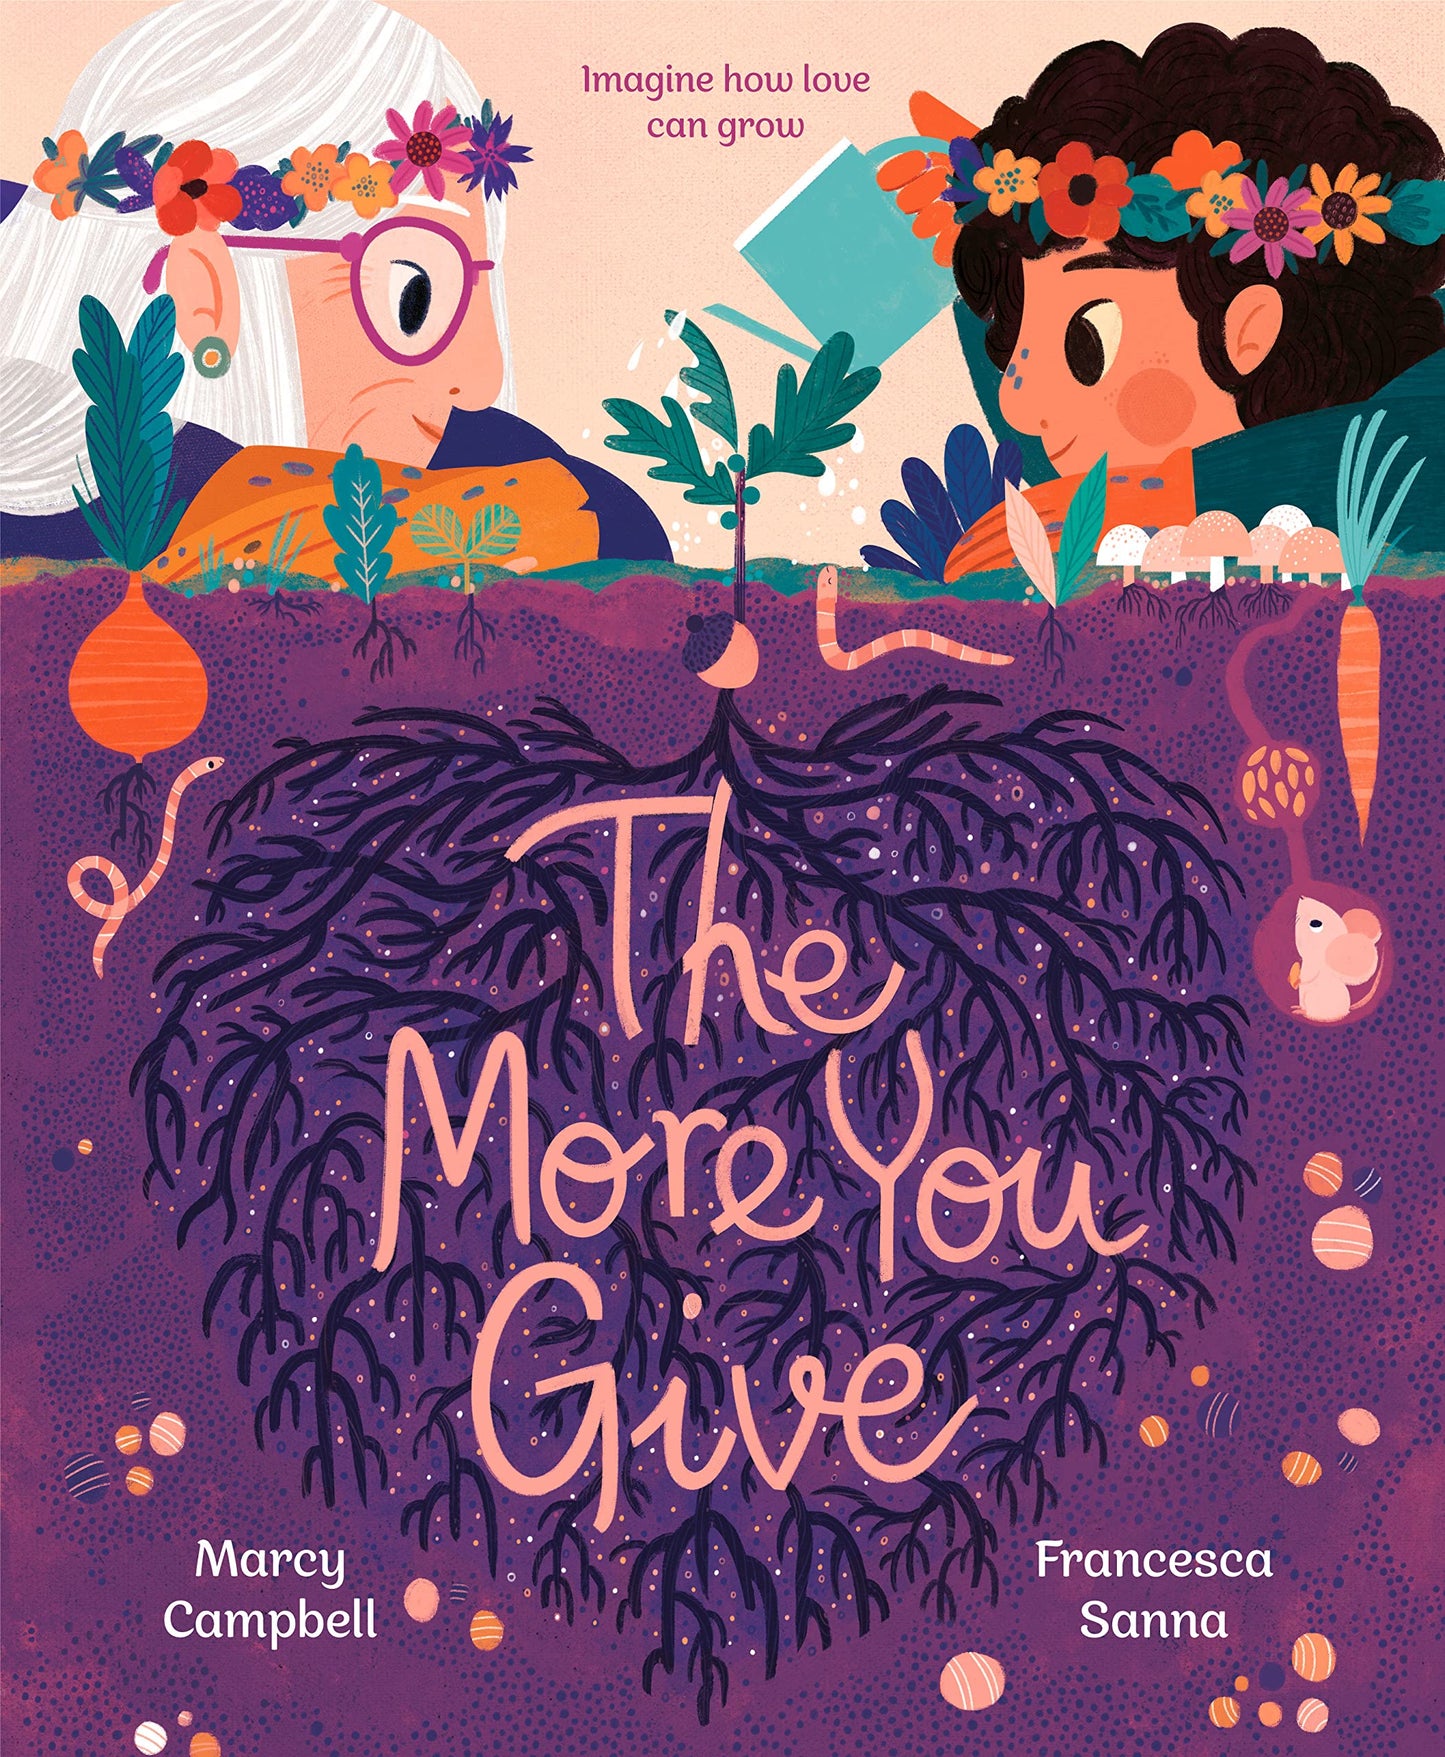 The More You Give - Marcy Campbell + Francesca Sanna